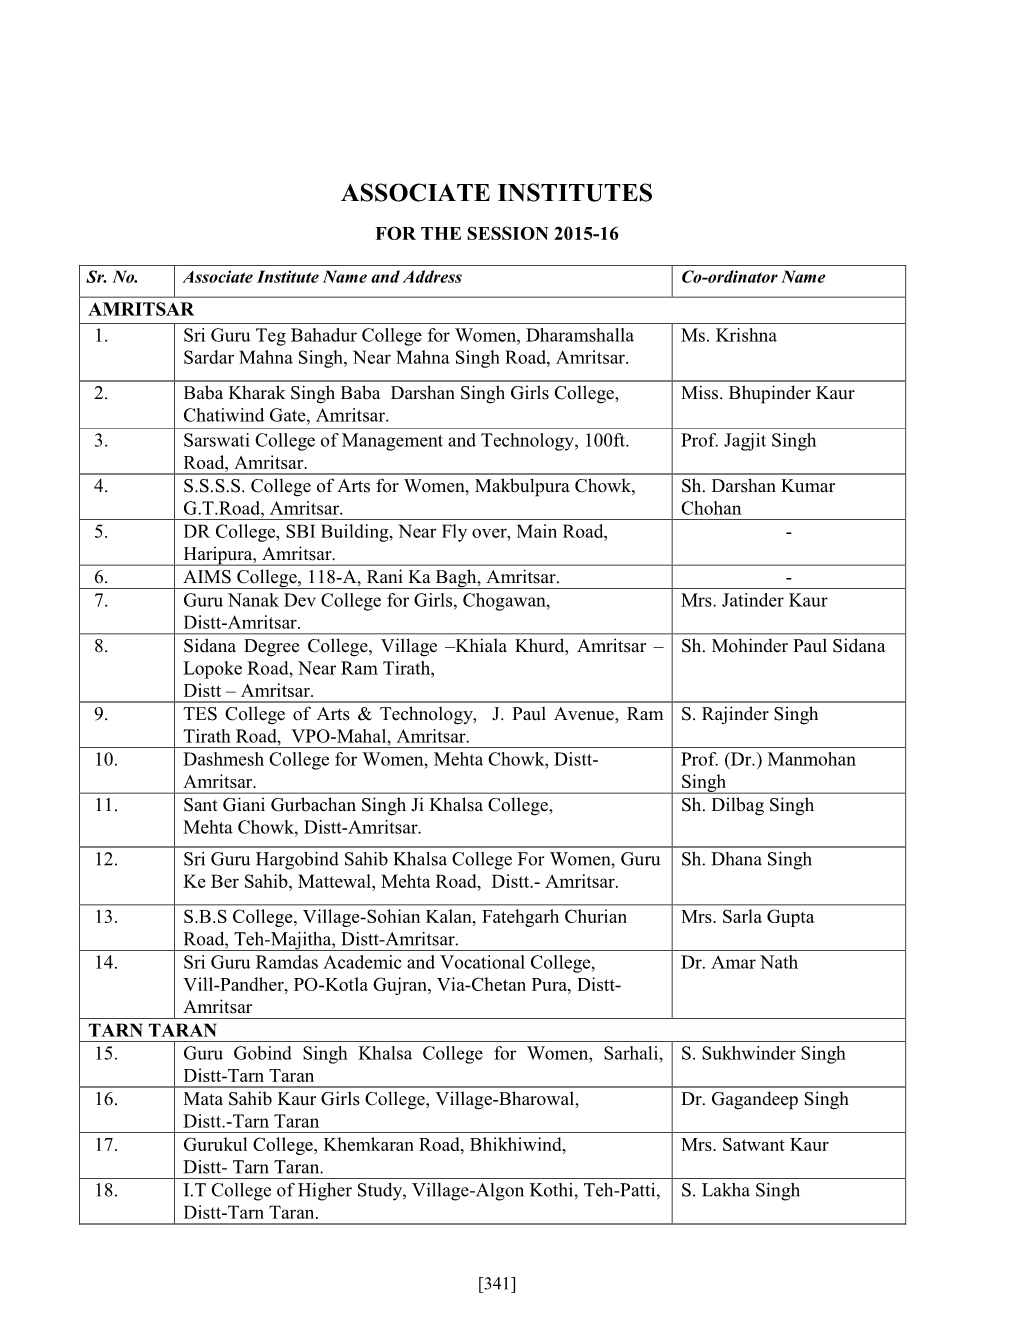 Associate Institutes for the Session 2015-16